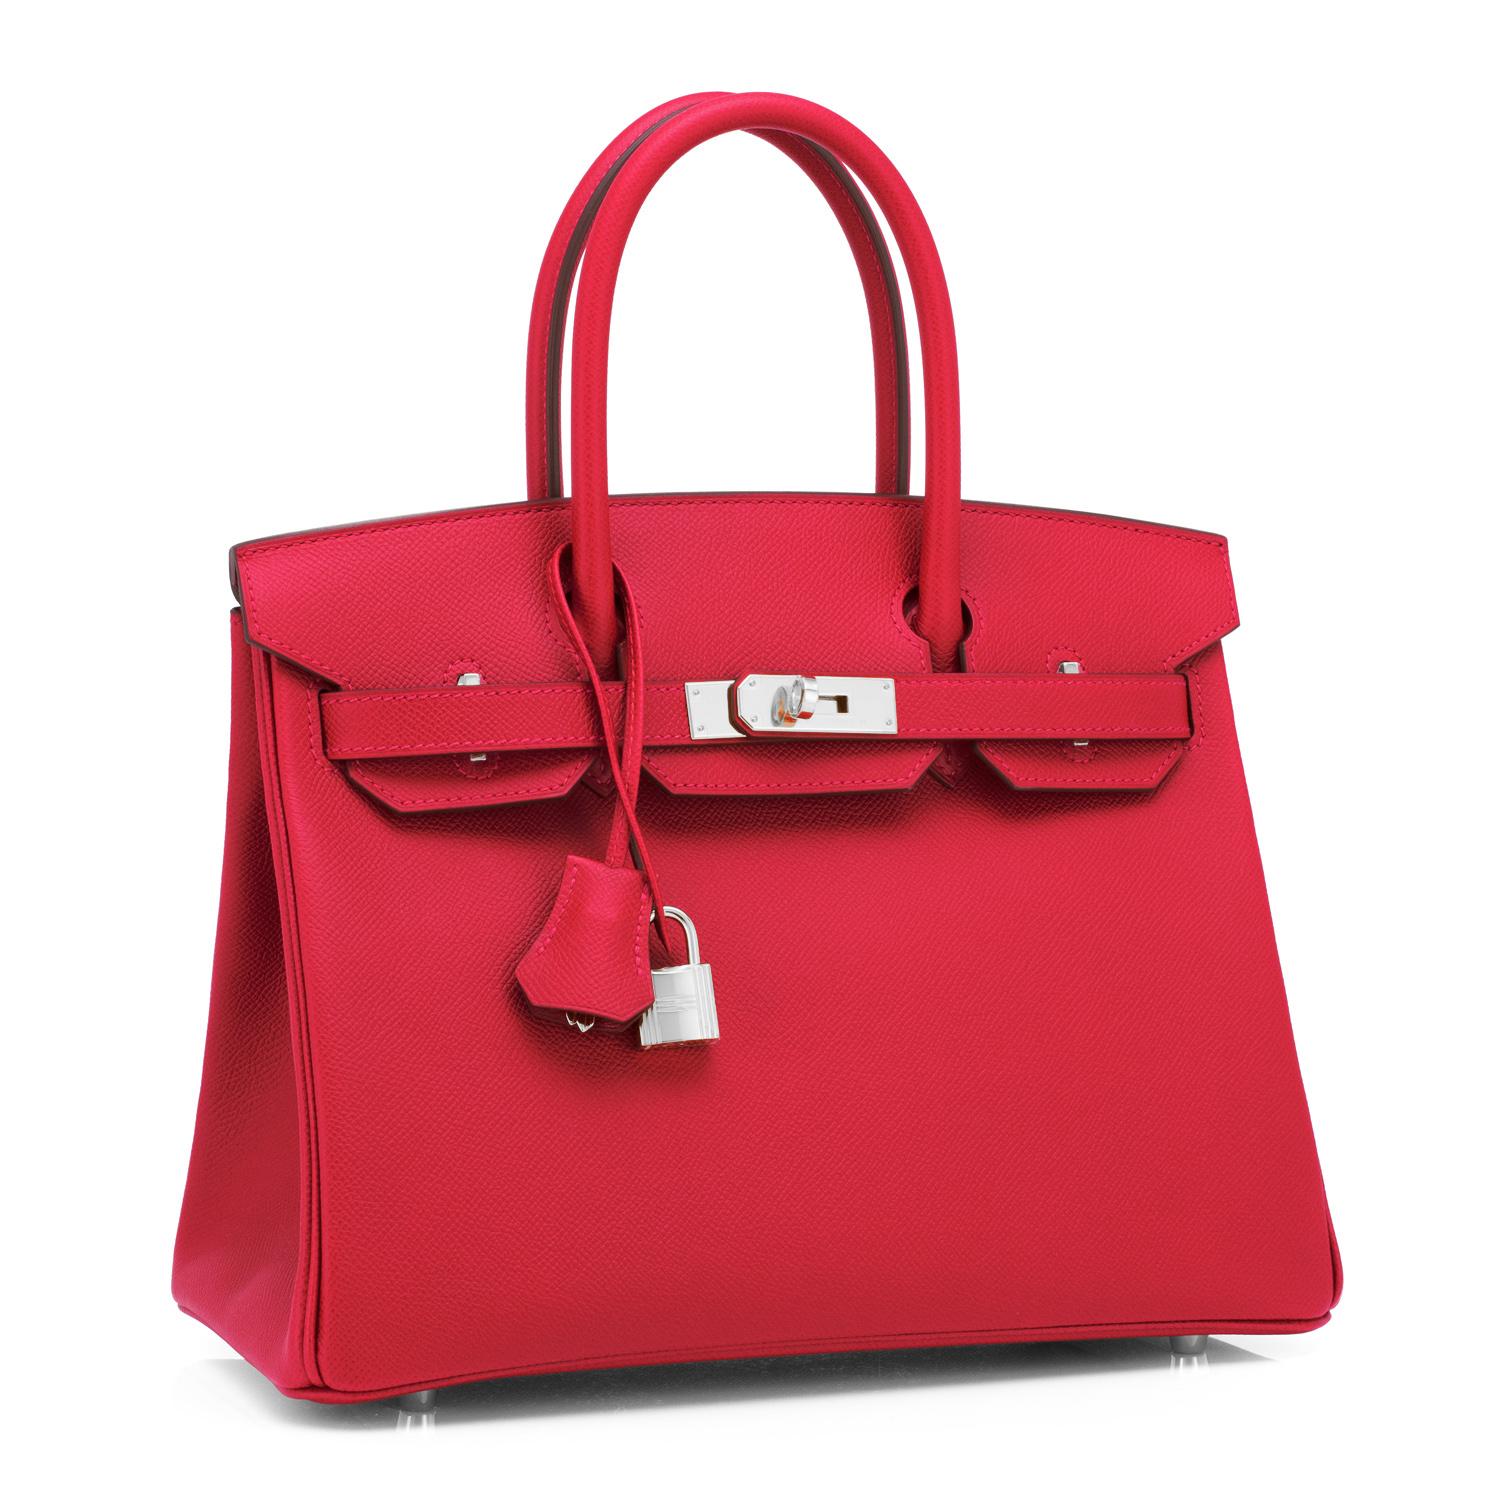 Guaranteed Authentic Hermes Birkin Bag 30cm Rouge de Coeur Epsom Palladium Hardware Y Stamp, 2020
Brand New in Box. Store fresh. Pristine condition (with plastic on hardware).
Just purchased from Hermes store; bag bears new 2020 interior Y